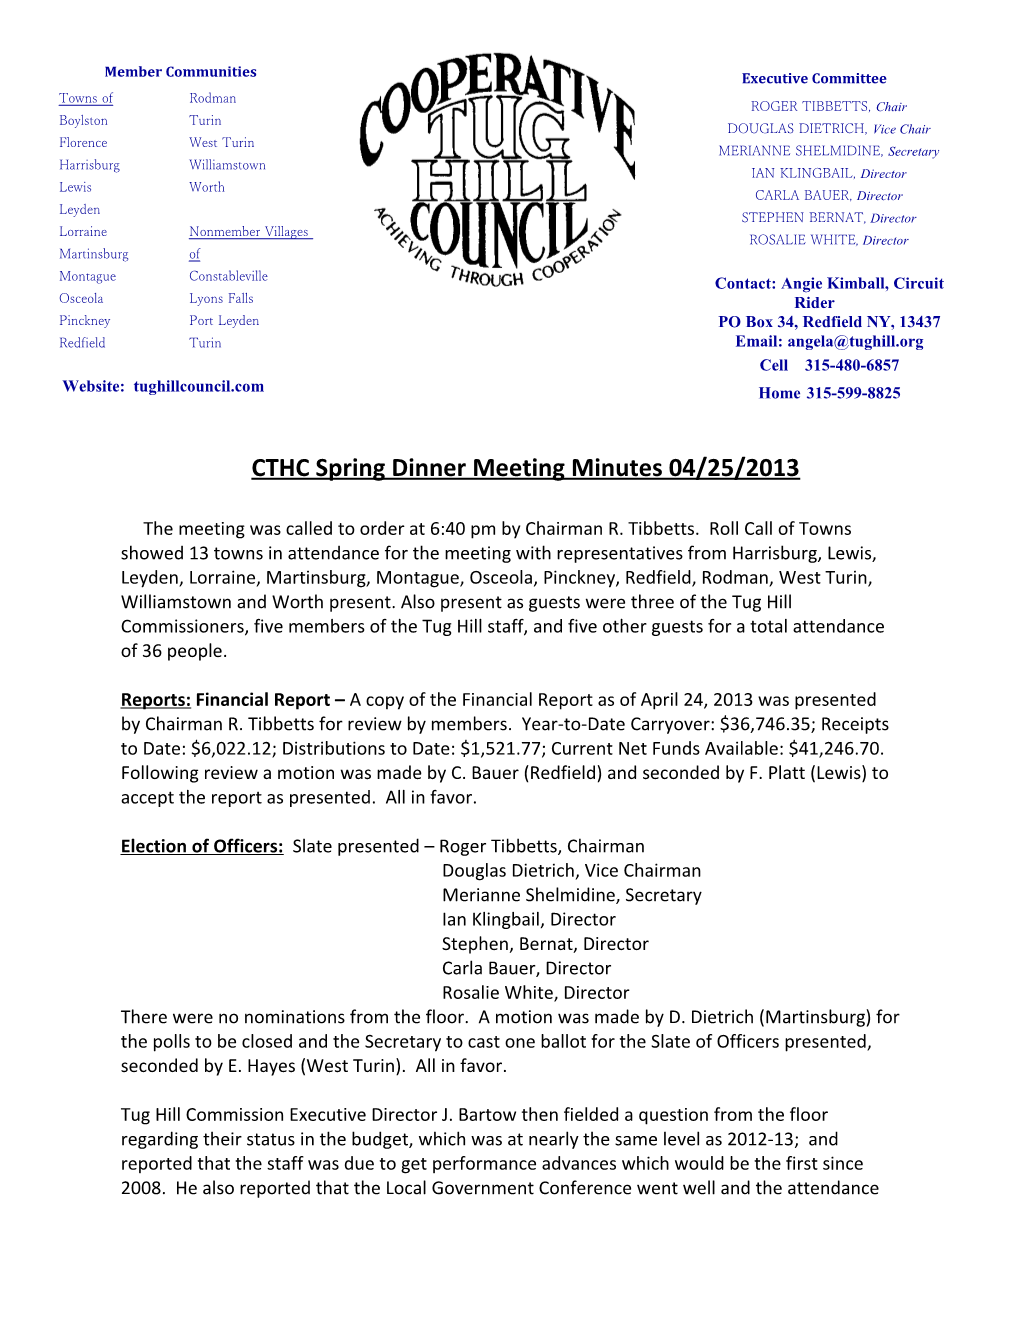 CTHC Spring Dinner Meeting Minutes 04/25/2013